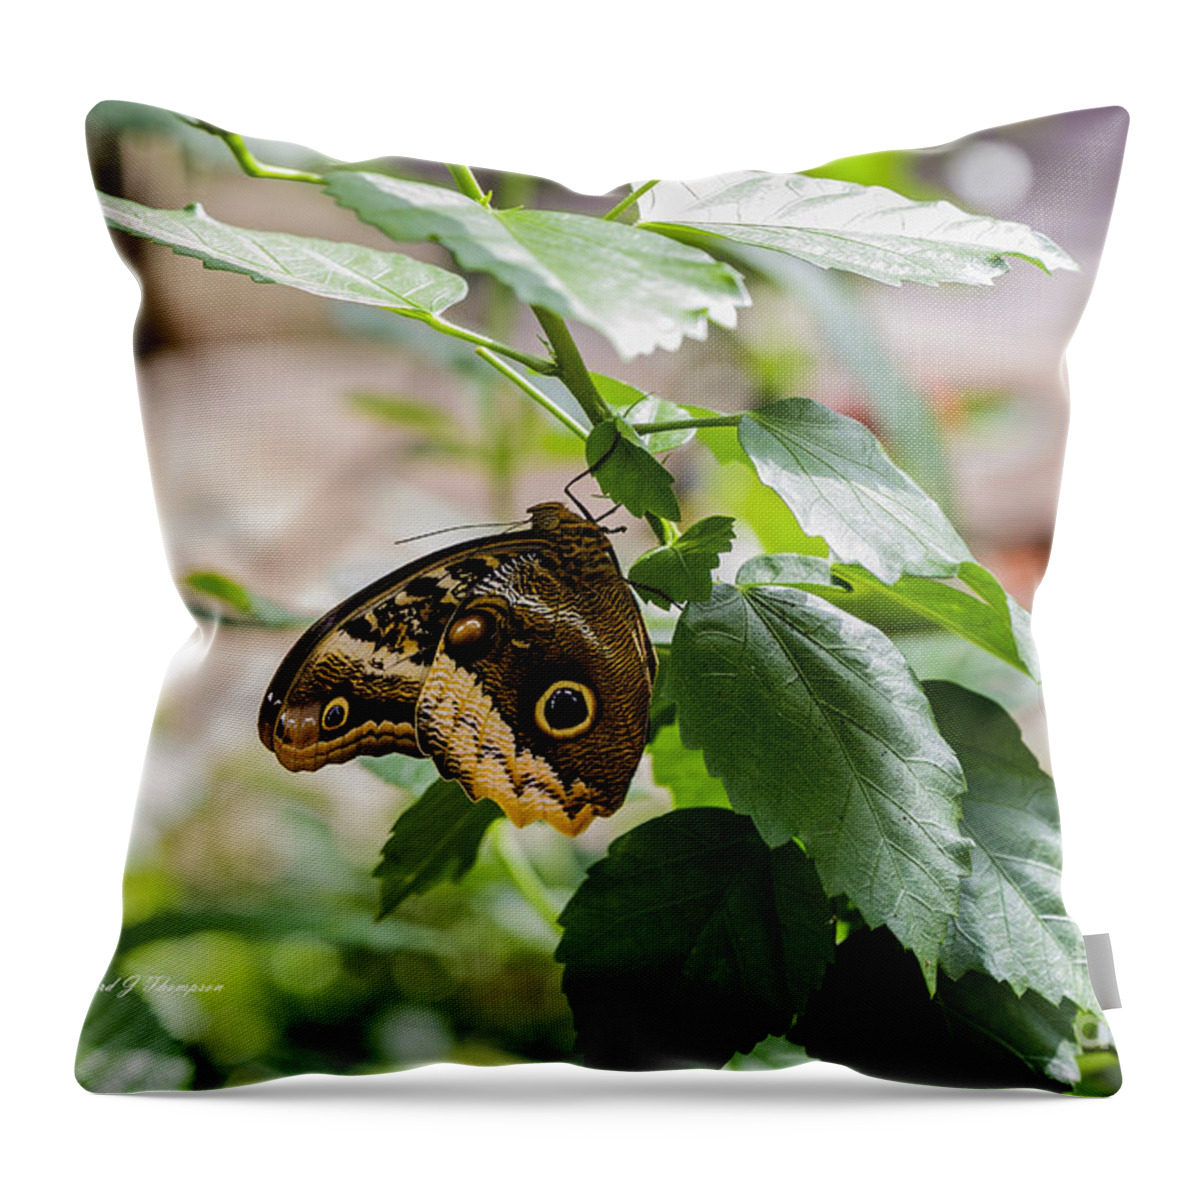 Owl Butterfly Wonderland Throw Pillow featuring the photograph Owl Butterfly by Richard J Thompson